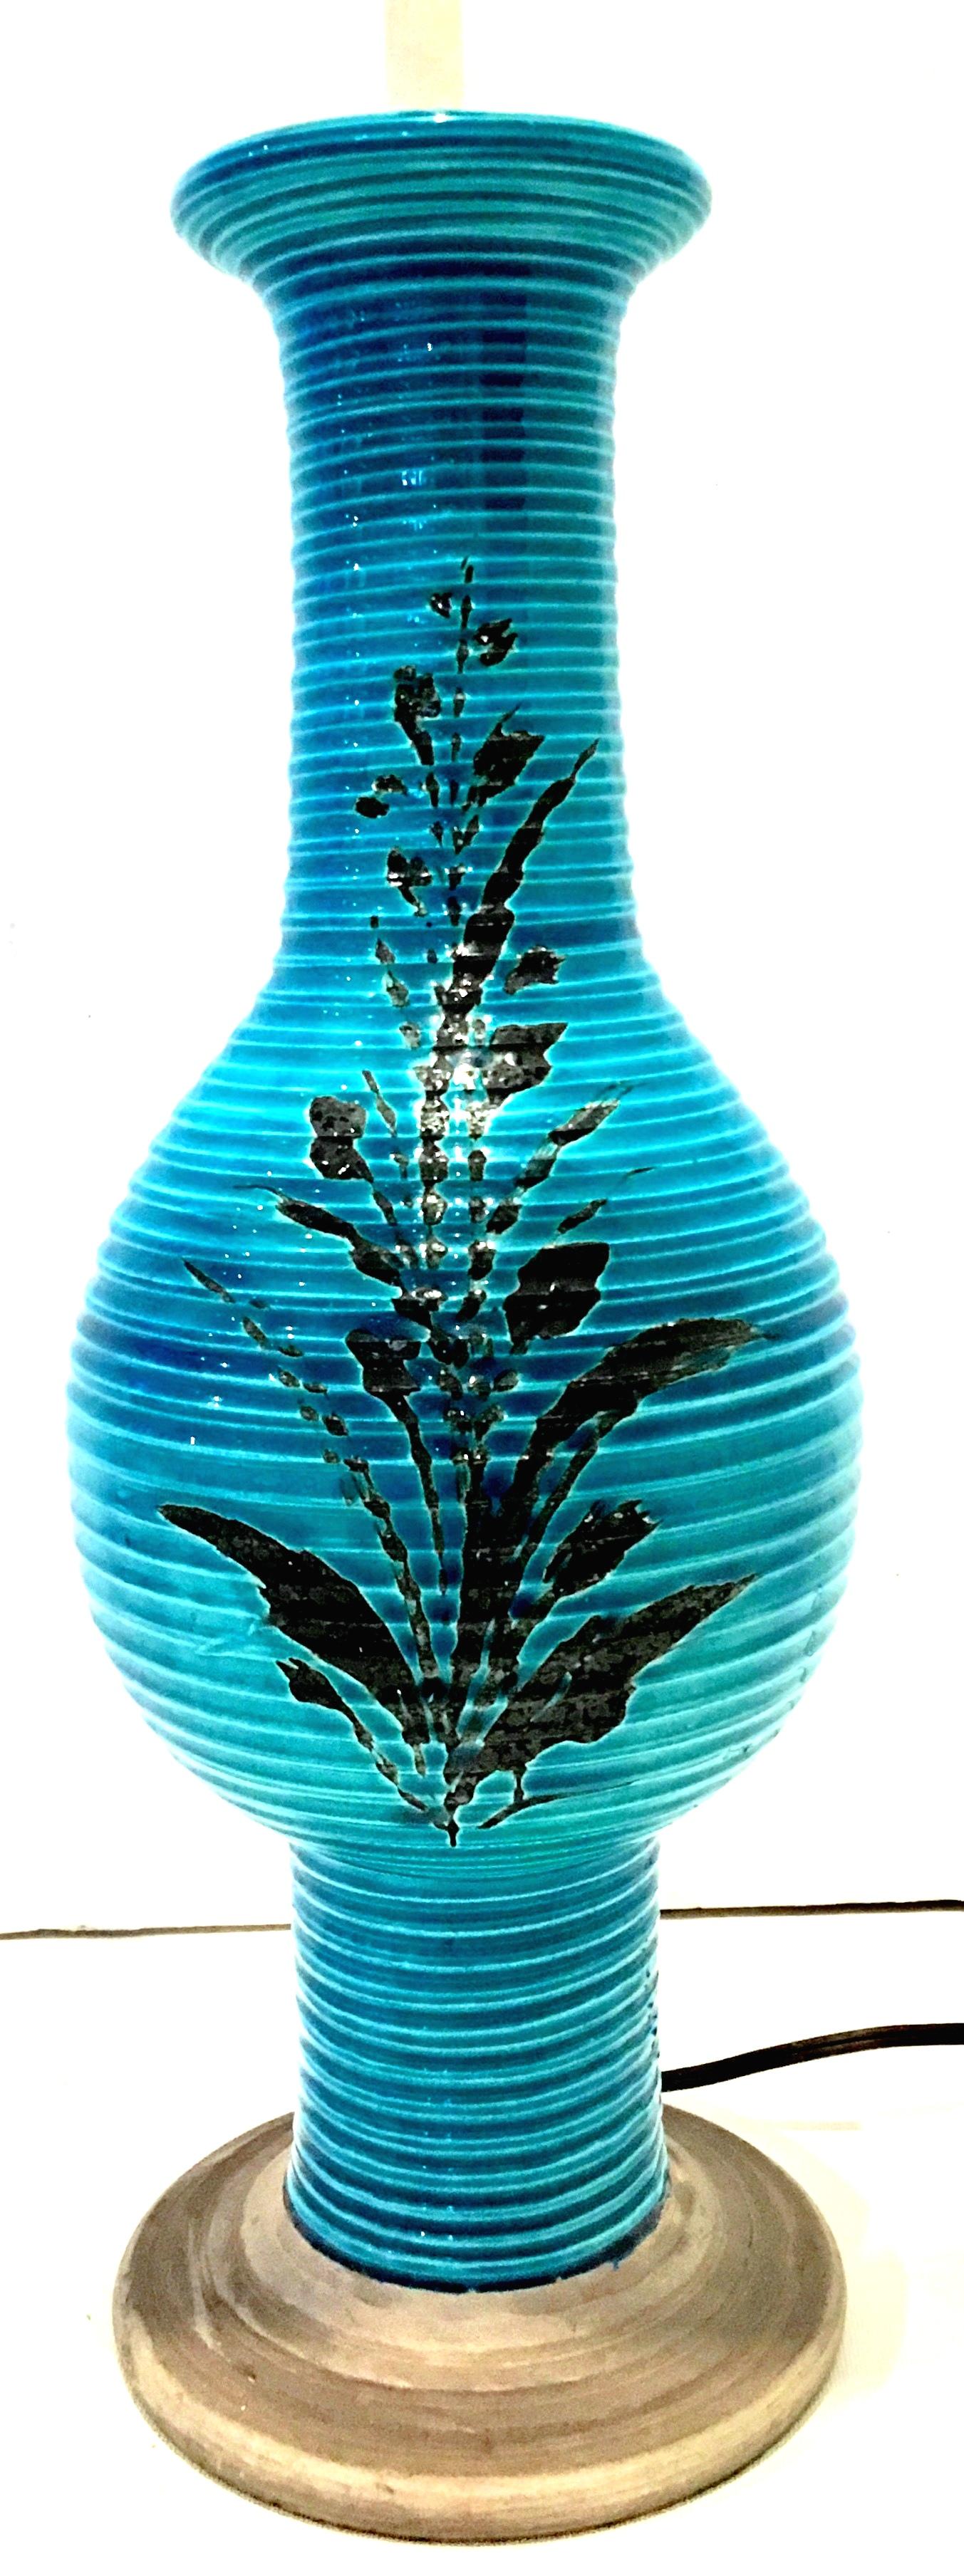 1960'S Italian Cerulean & Black Ceramic Glaze Pottery Lamp By, Bitossi In Good Condition For Sale In West Palm Beach, FL